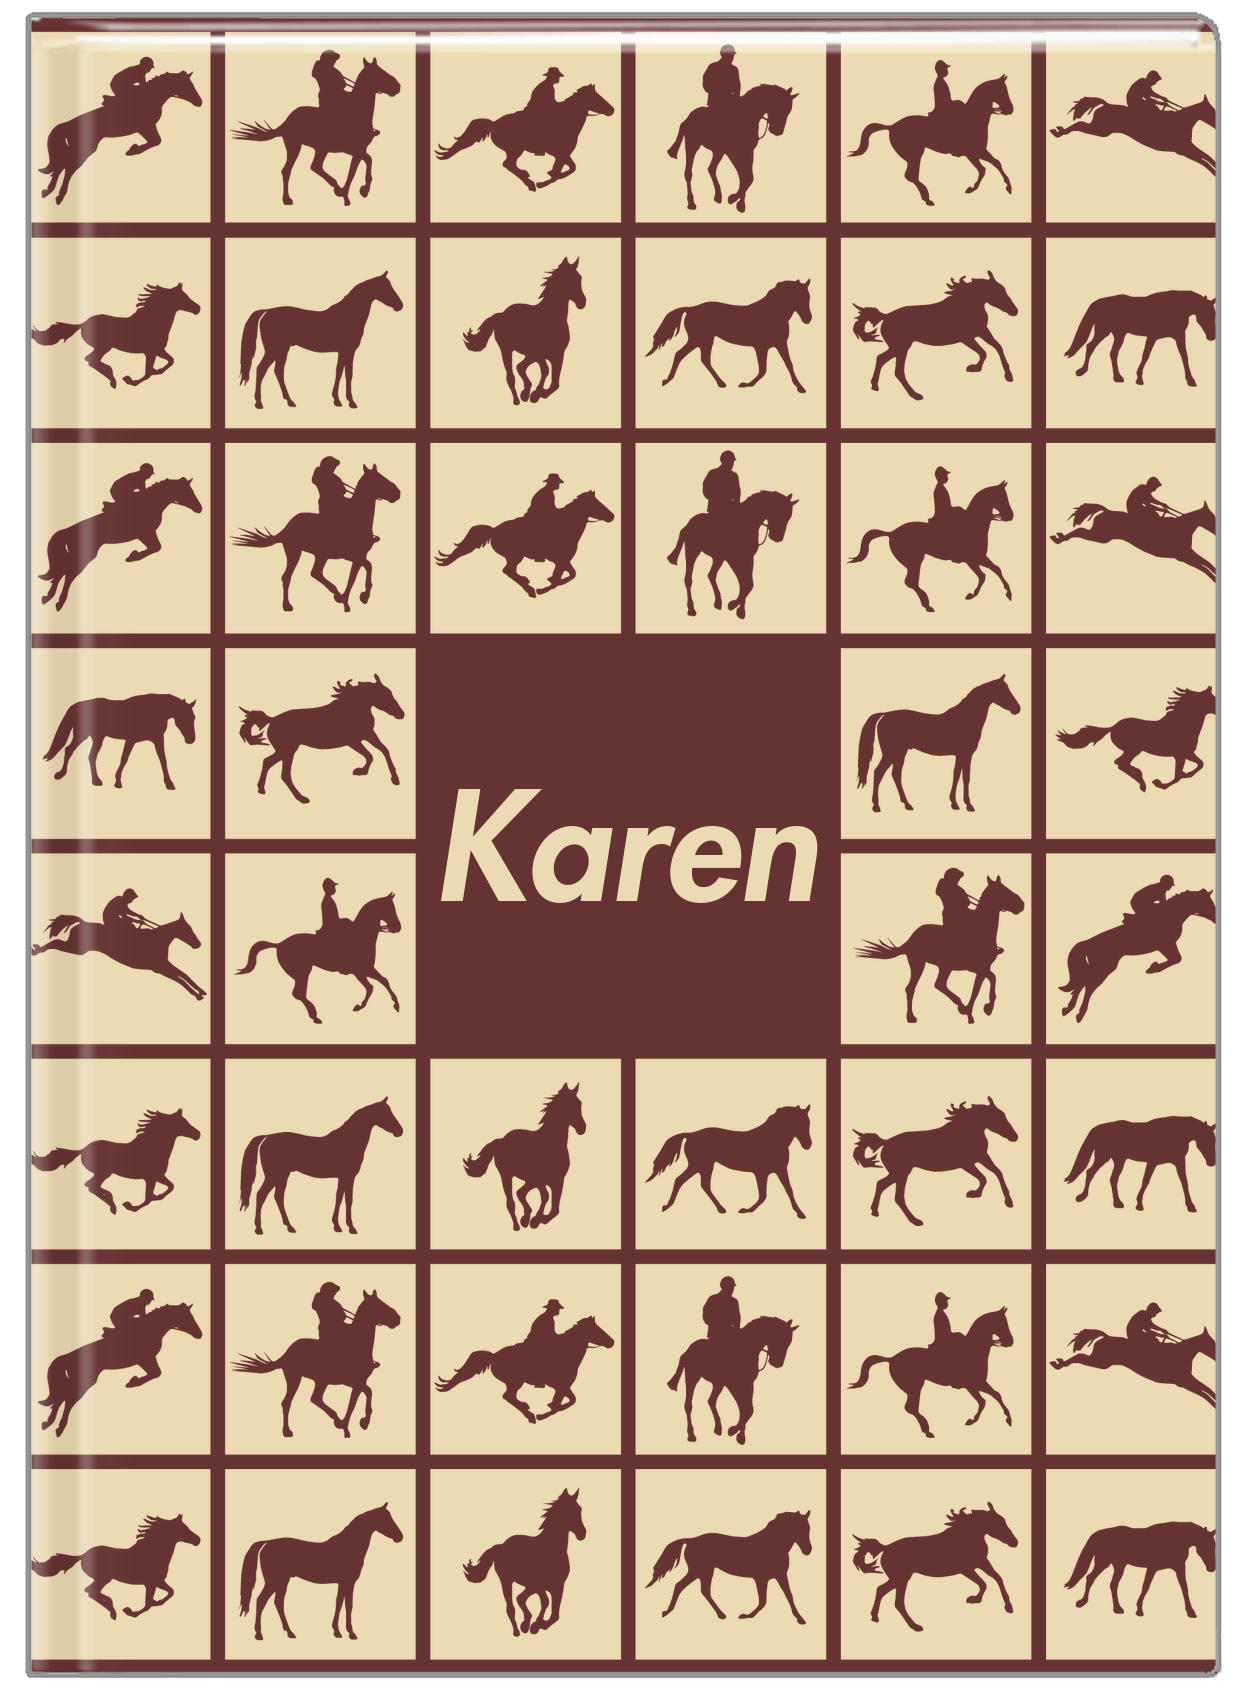 Personalized Horses Journal VII - Horses Squared - Tan Background - Front View